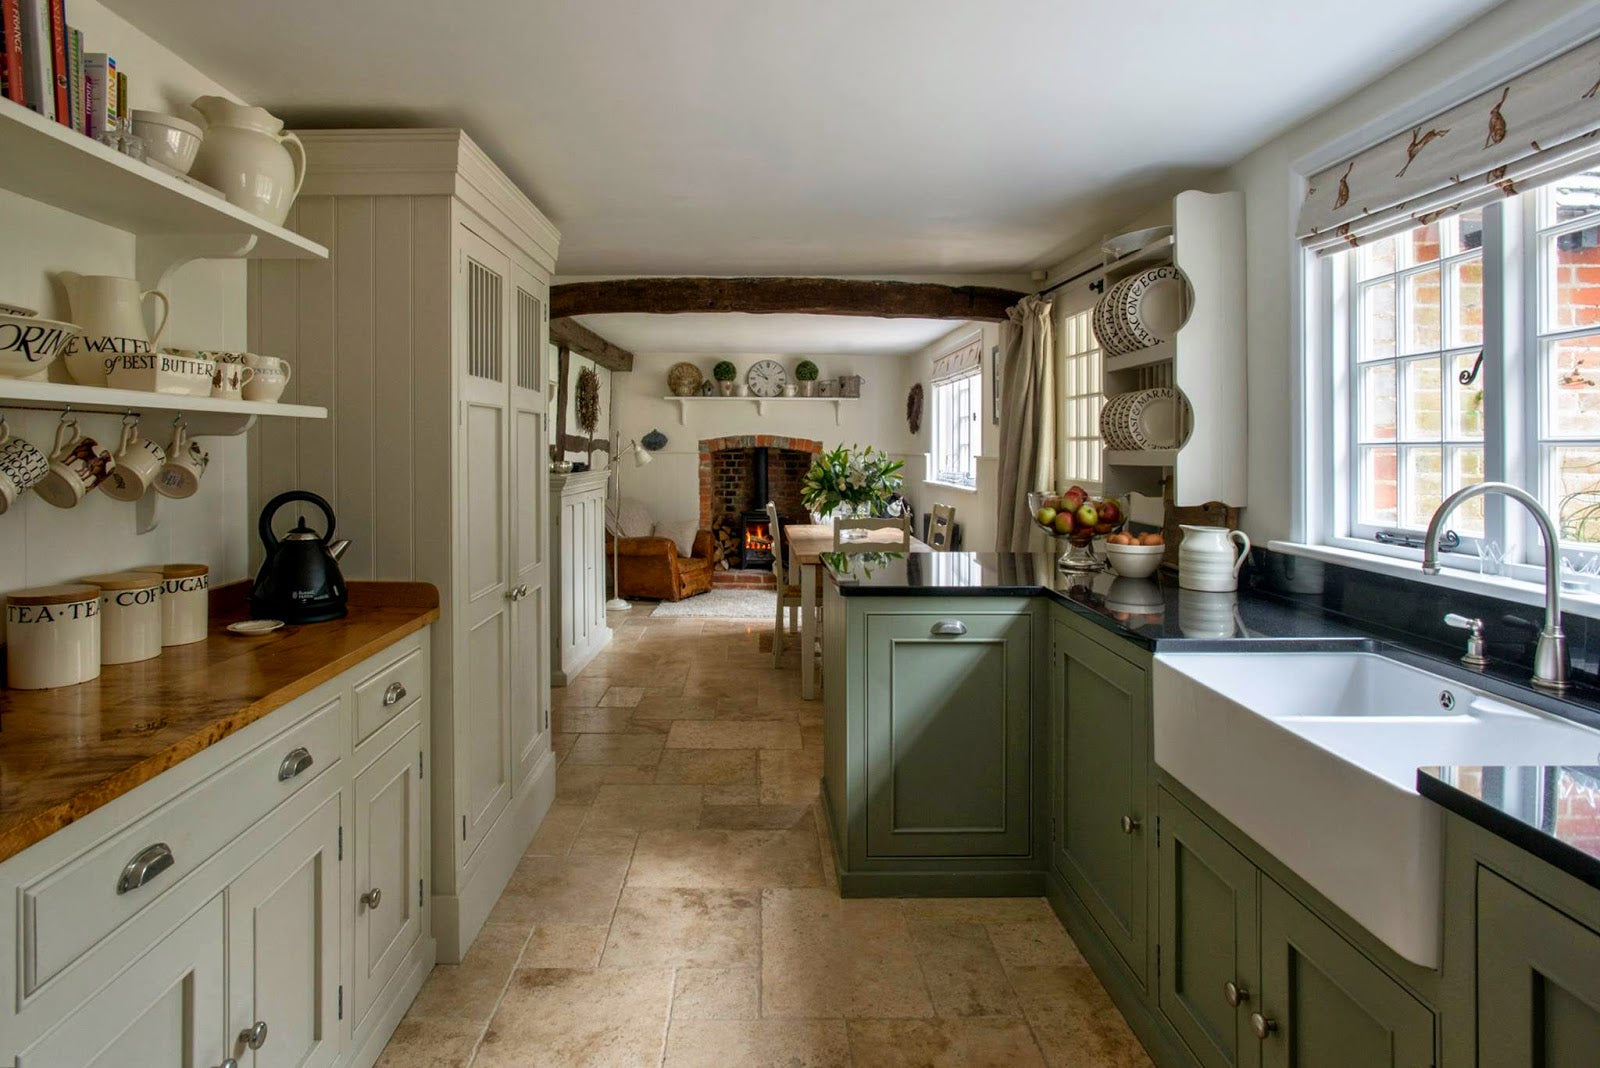 Farmhouse kitchen ideas: designs for a modern country space